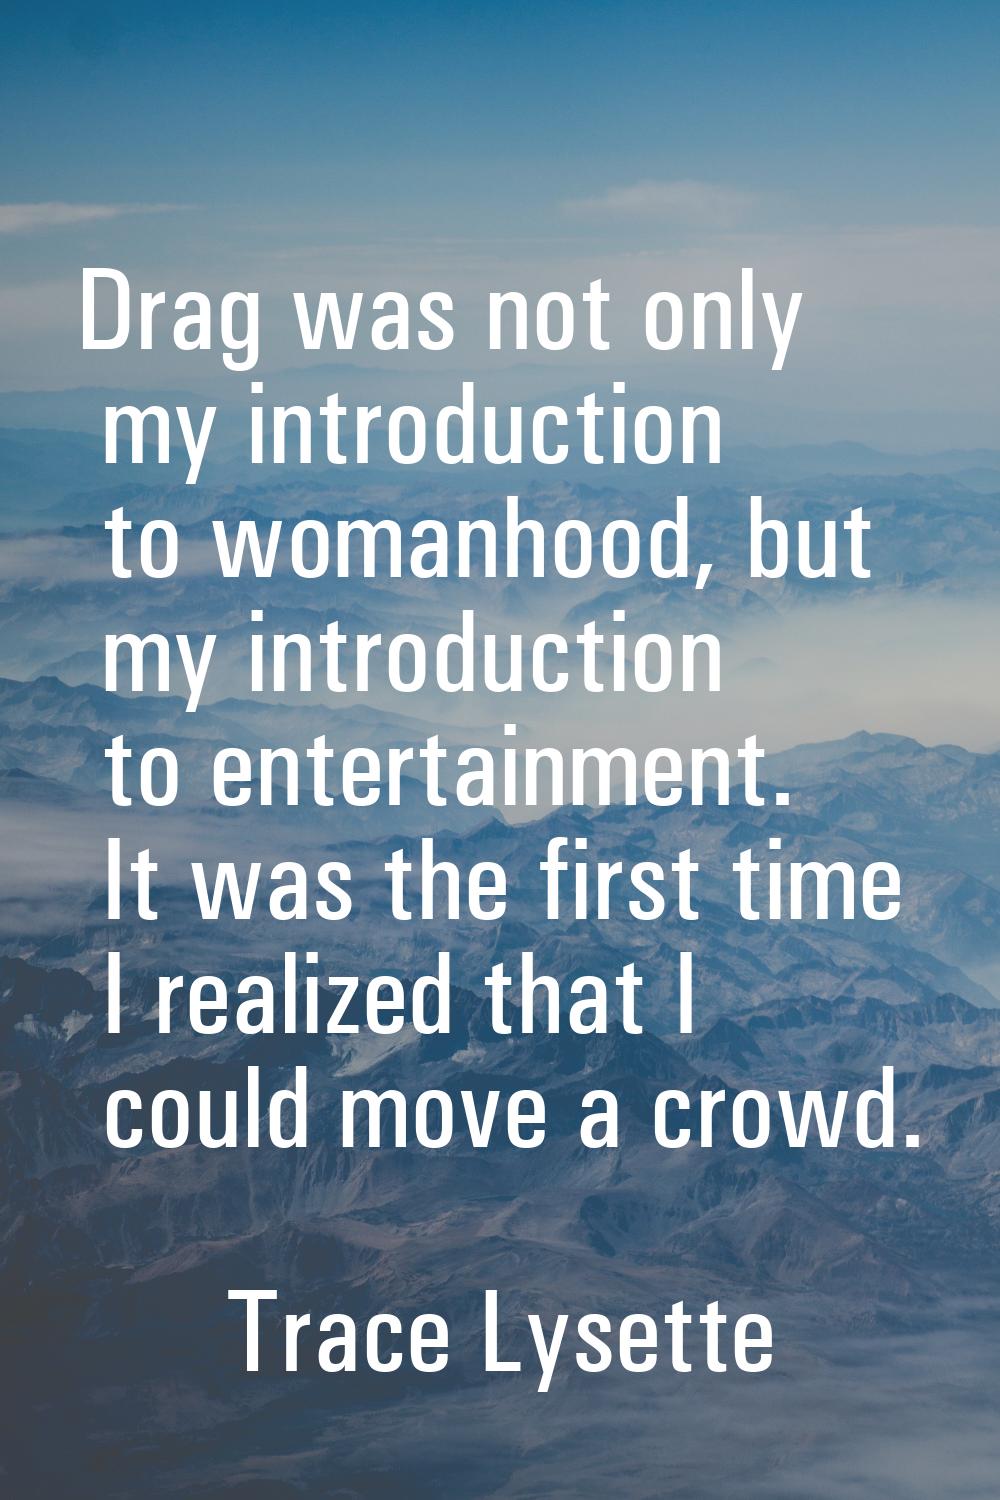 Drag was not only my introduction to womanhood, but my introduction to entertainment. It was the fi